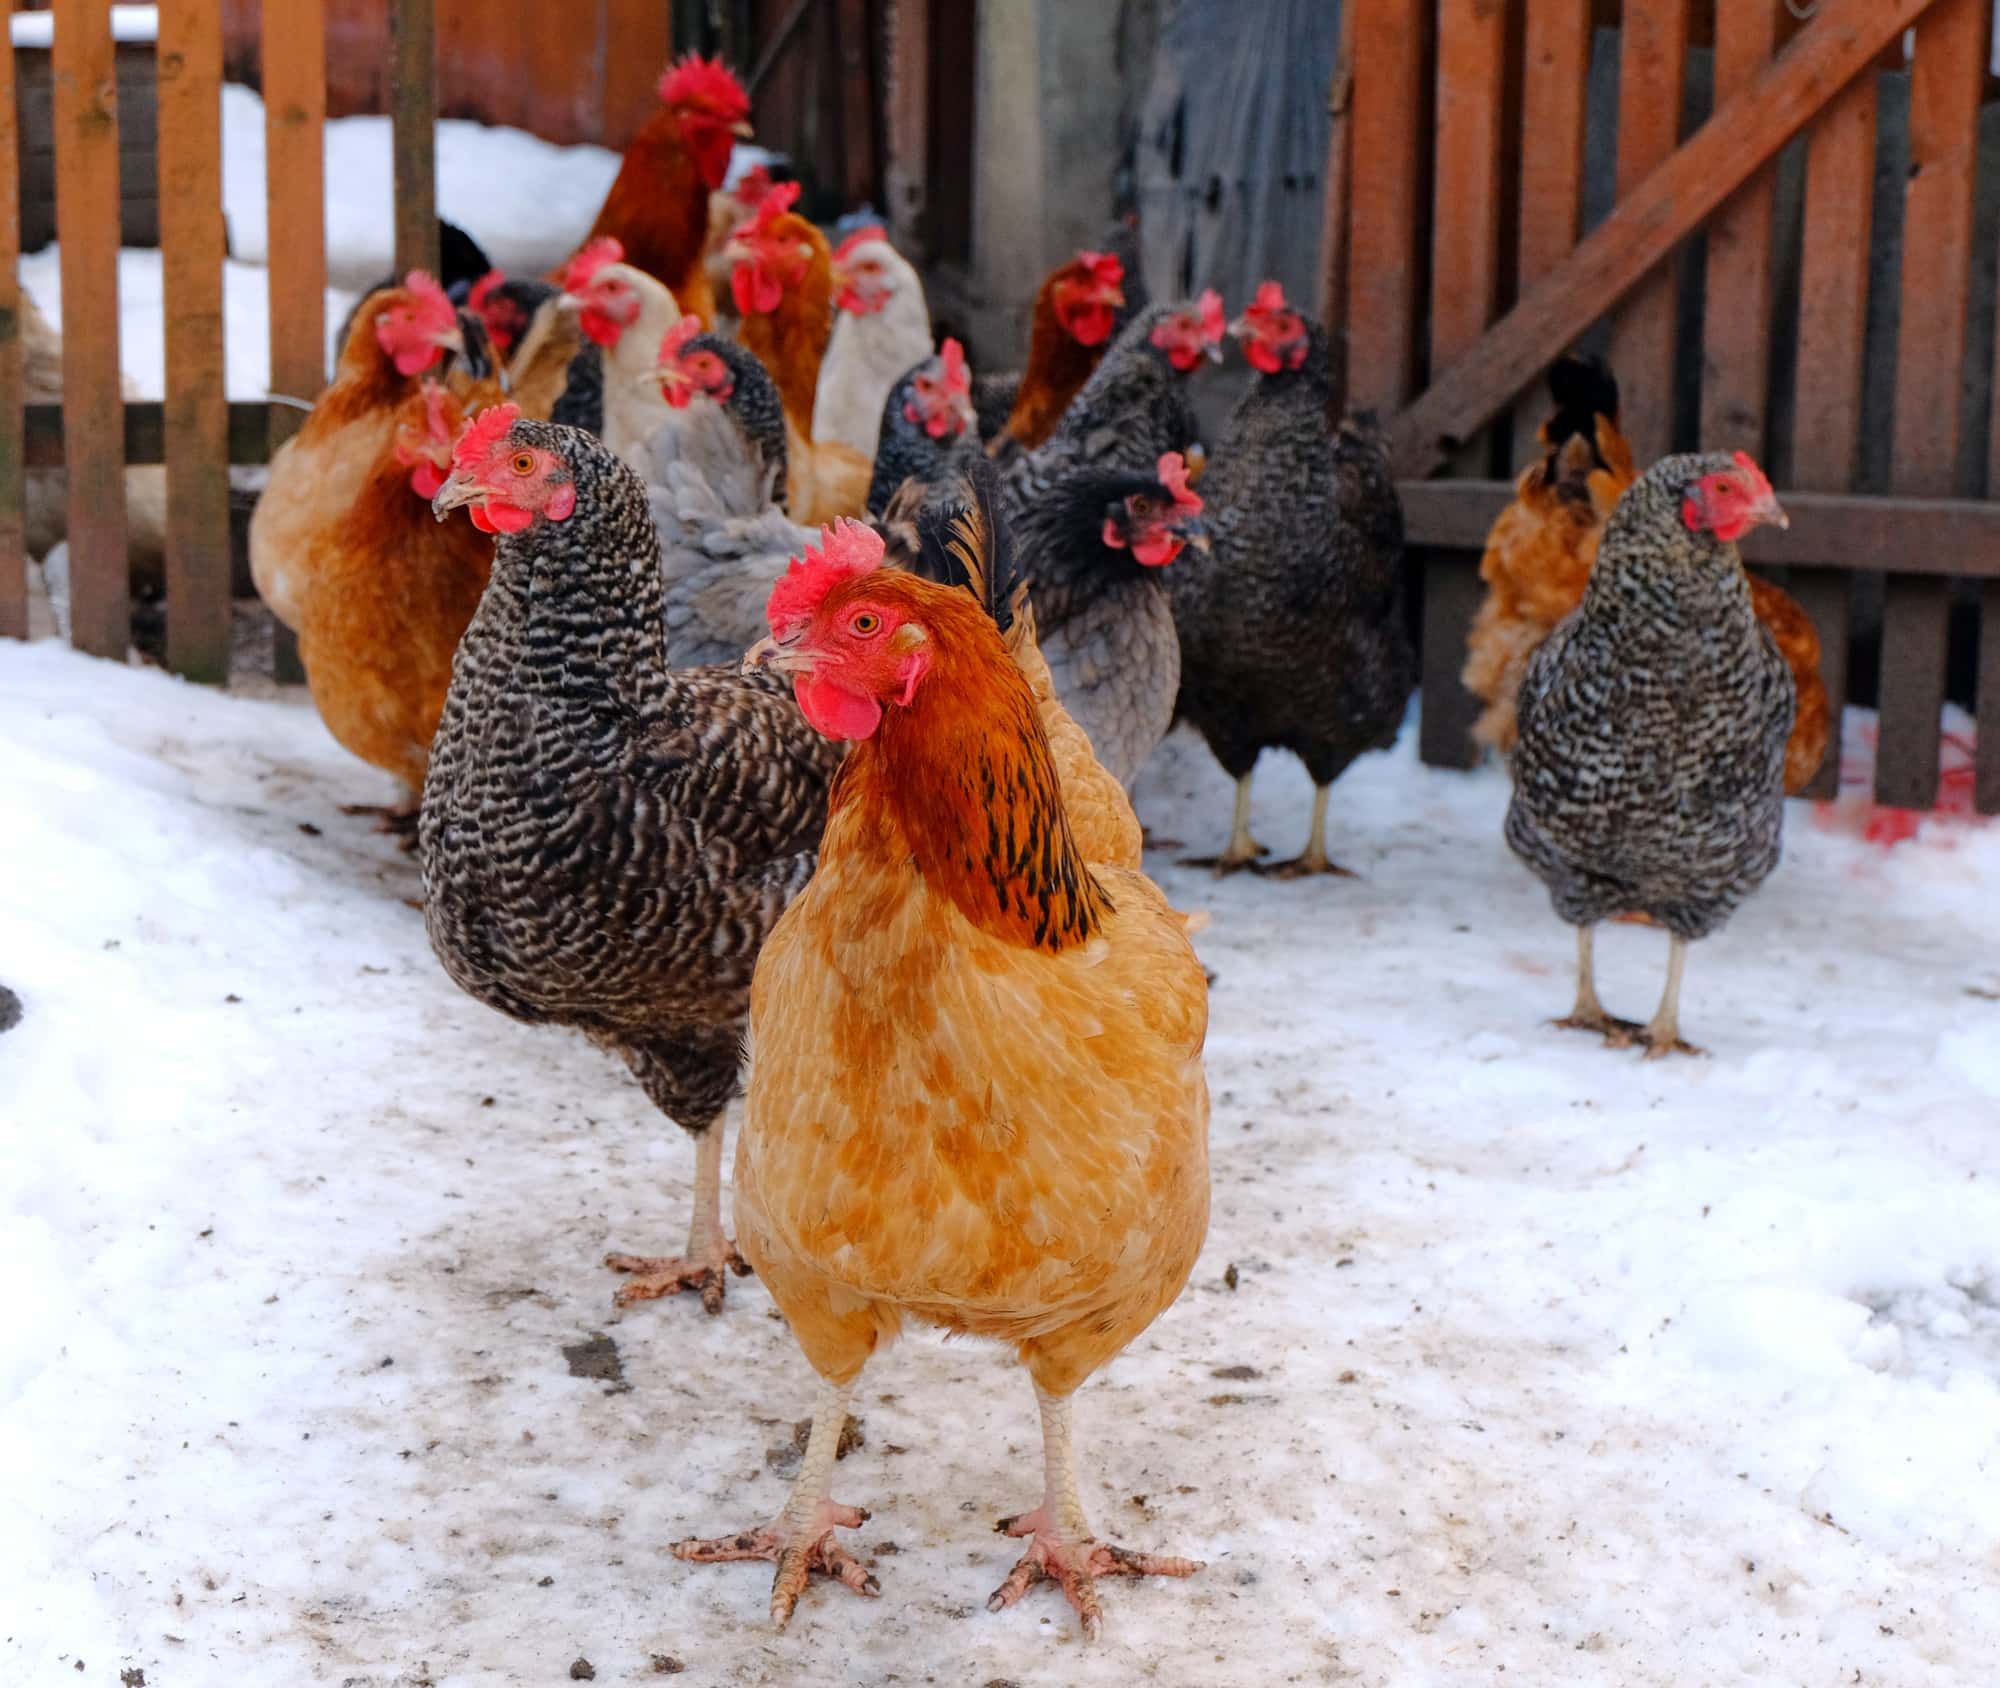 Hens and cock on a barnyard in a winter period